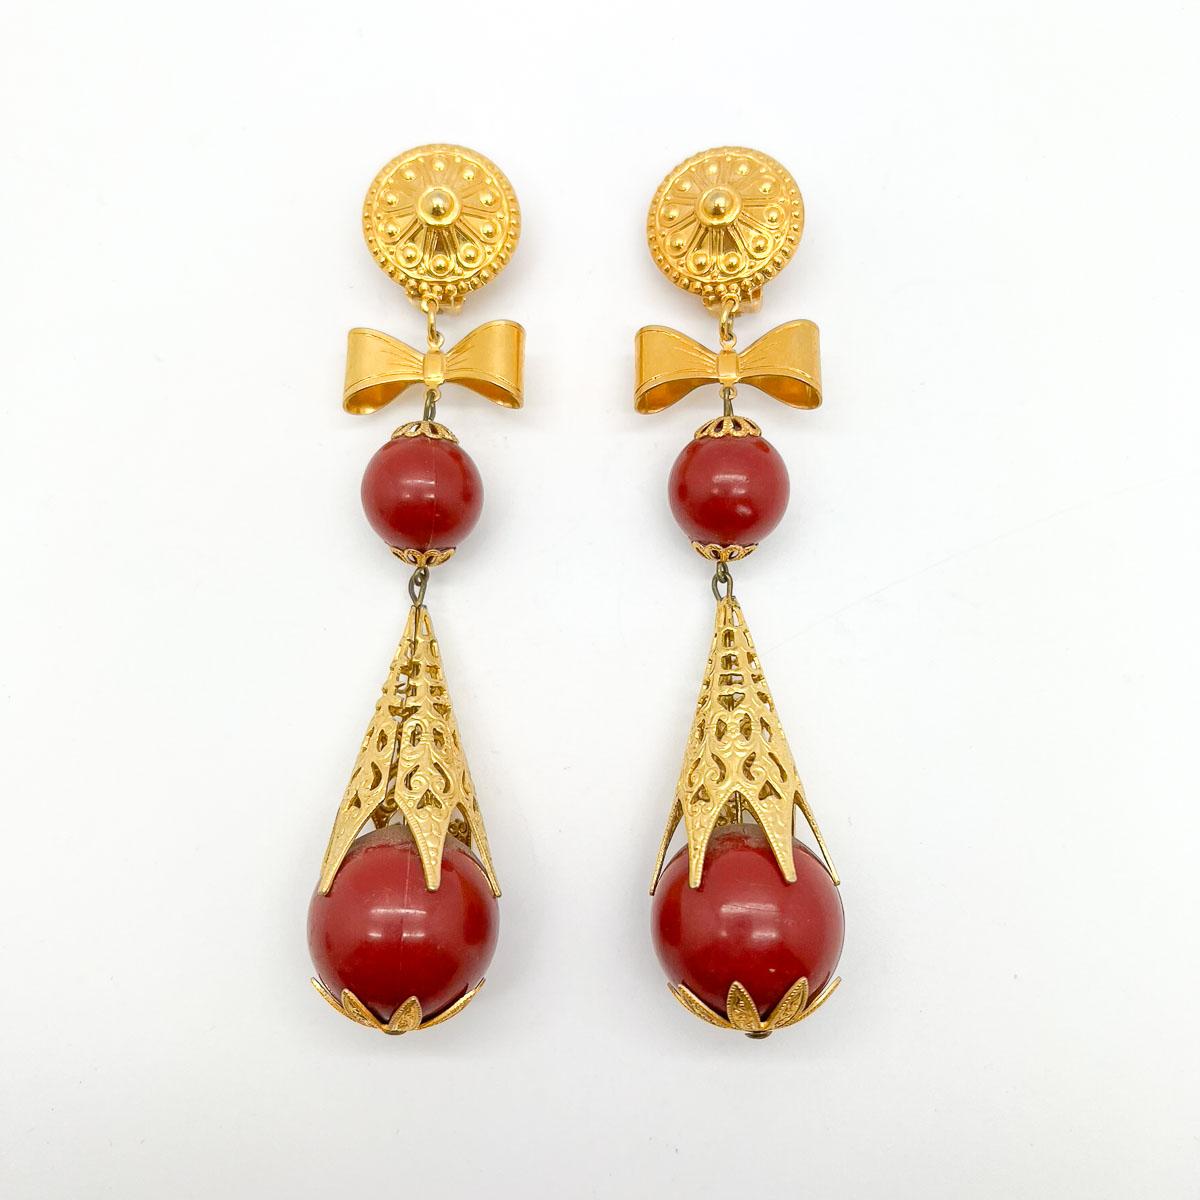 Vintage Filigree Bomb Earrings hailing originally from Italy and the 1970s. With their true shoulder duster proportions and exquisite attention to detail, these glorious statement earrings are certain to transform your look.

Vintage Condition: Very